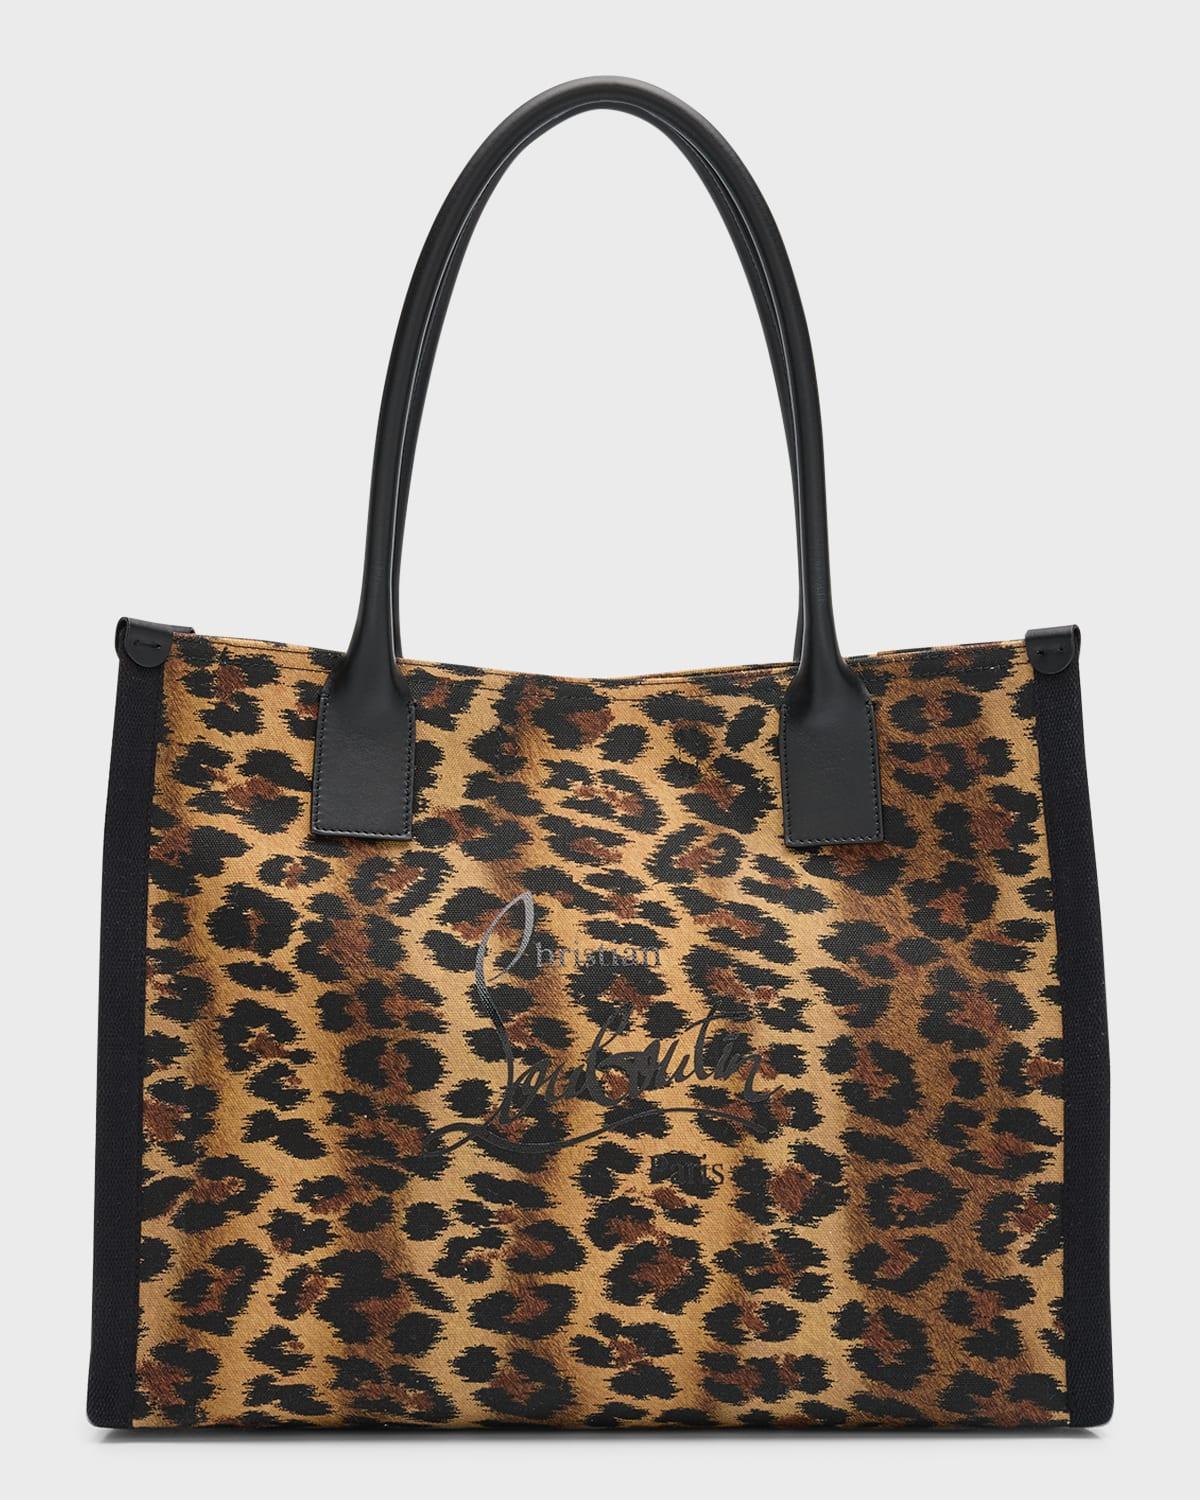 Christian Louboutin Nastroloubi Large Leopard Canvas Tote Bag in Brown ...